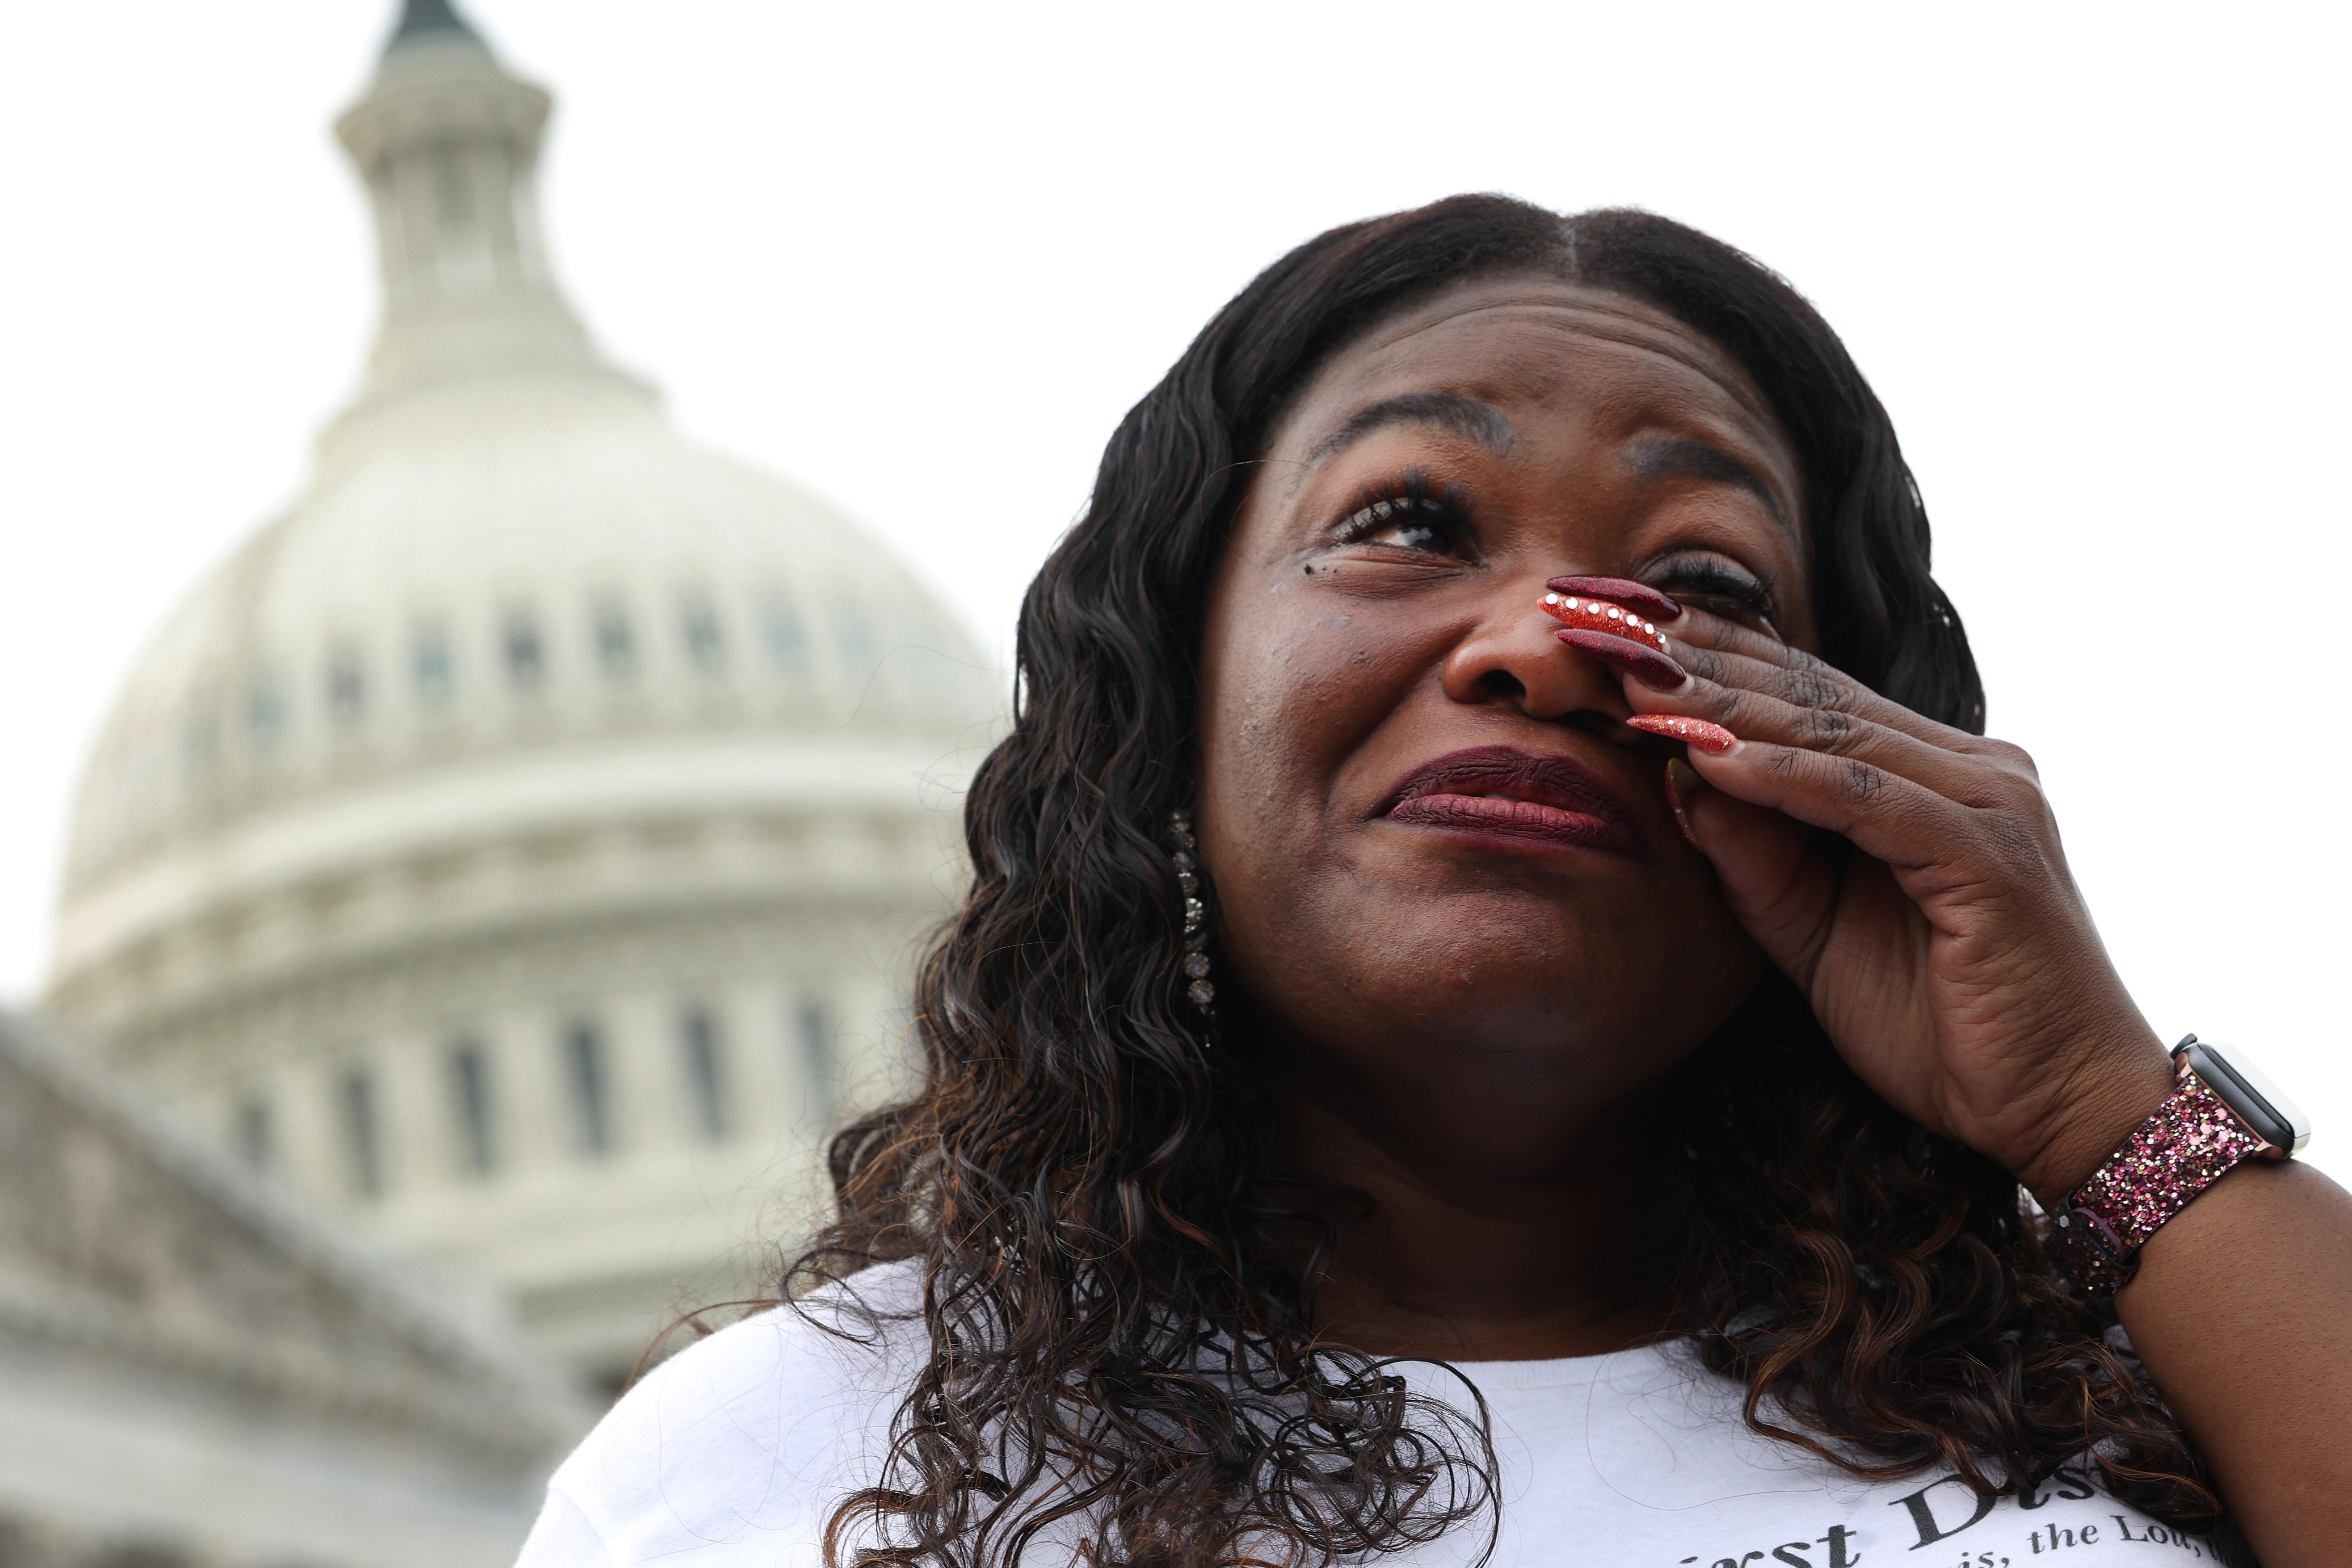 Rep. Cori Bush (D-MO) becomes emotional during a news conference on the eviction moratorium at the Capitol on August 3, 2021 in Washington, D.C.